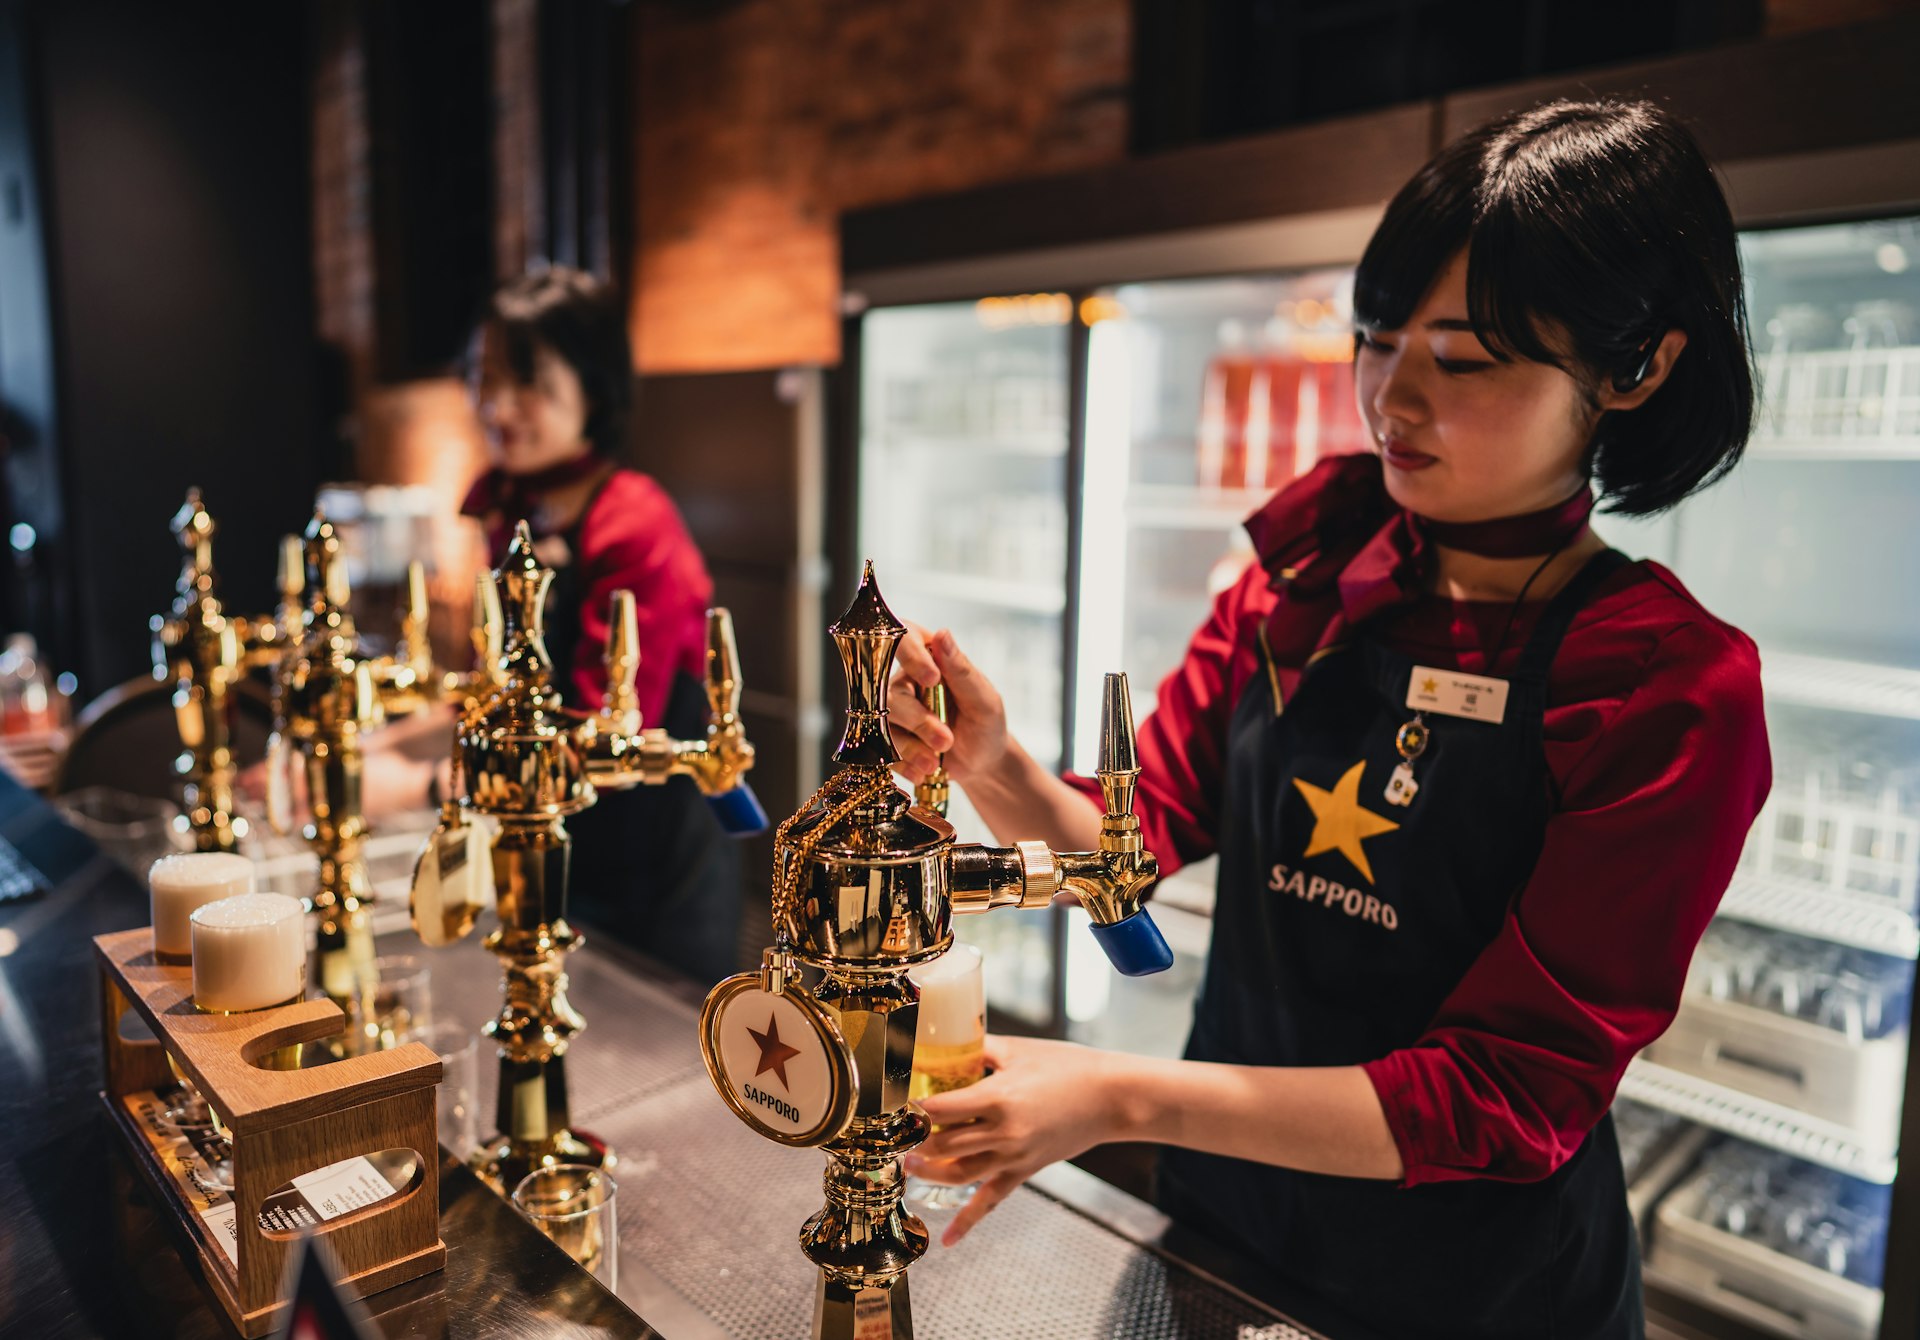 A woman with a black bob haircut in a red shirt and a black apron with a yellow star and the Sapporo logo pours a beer from a vintage-looking brass tap in a bar full of natural light at the Sapporo Beer Museum